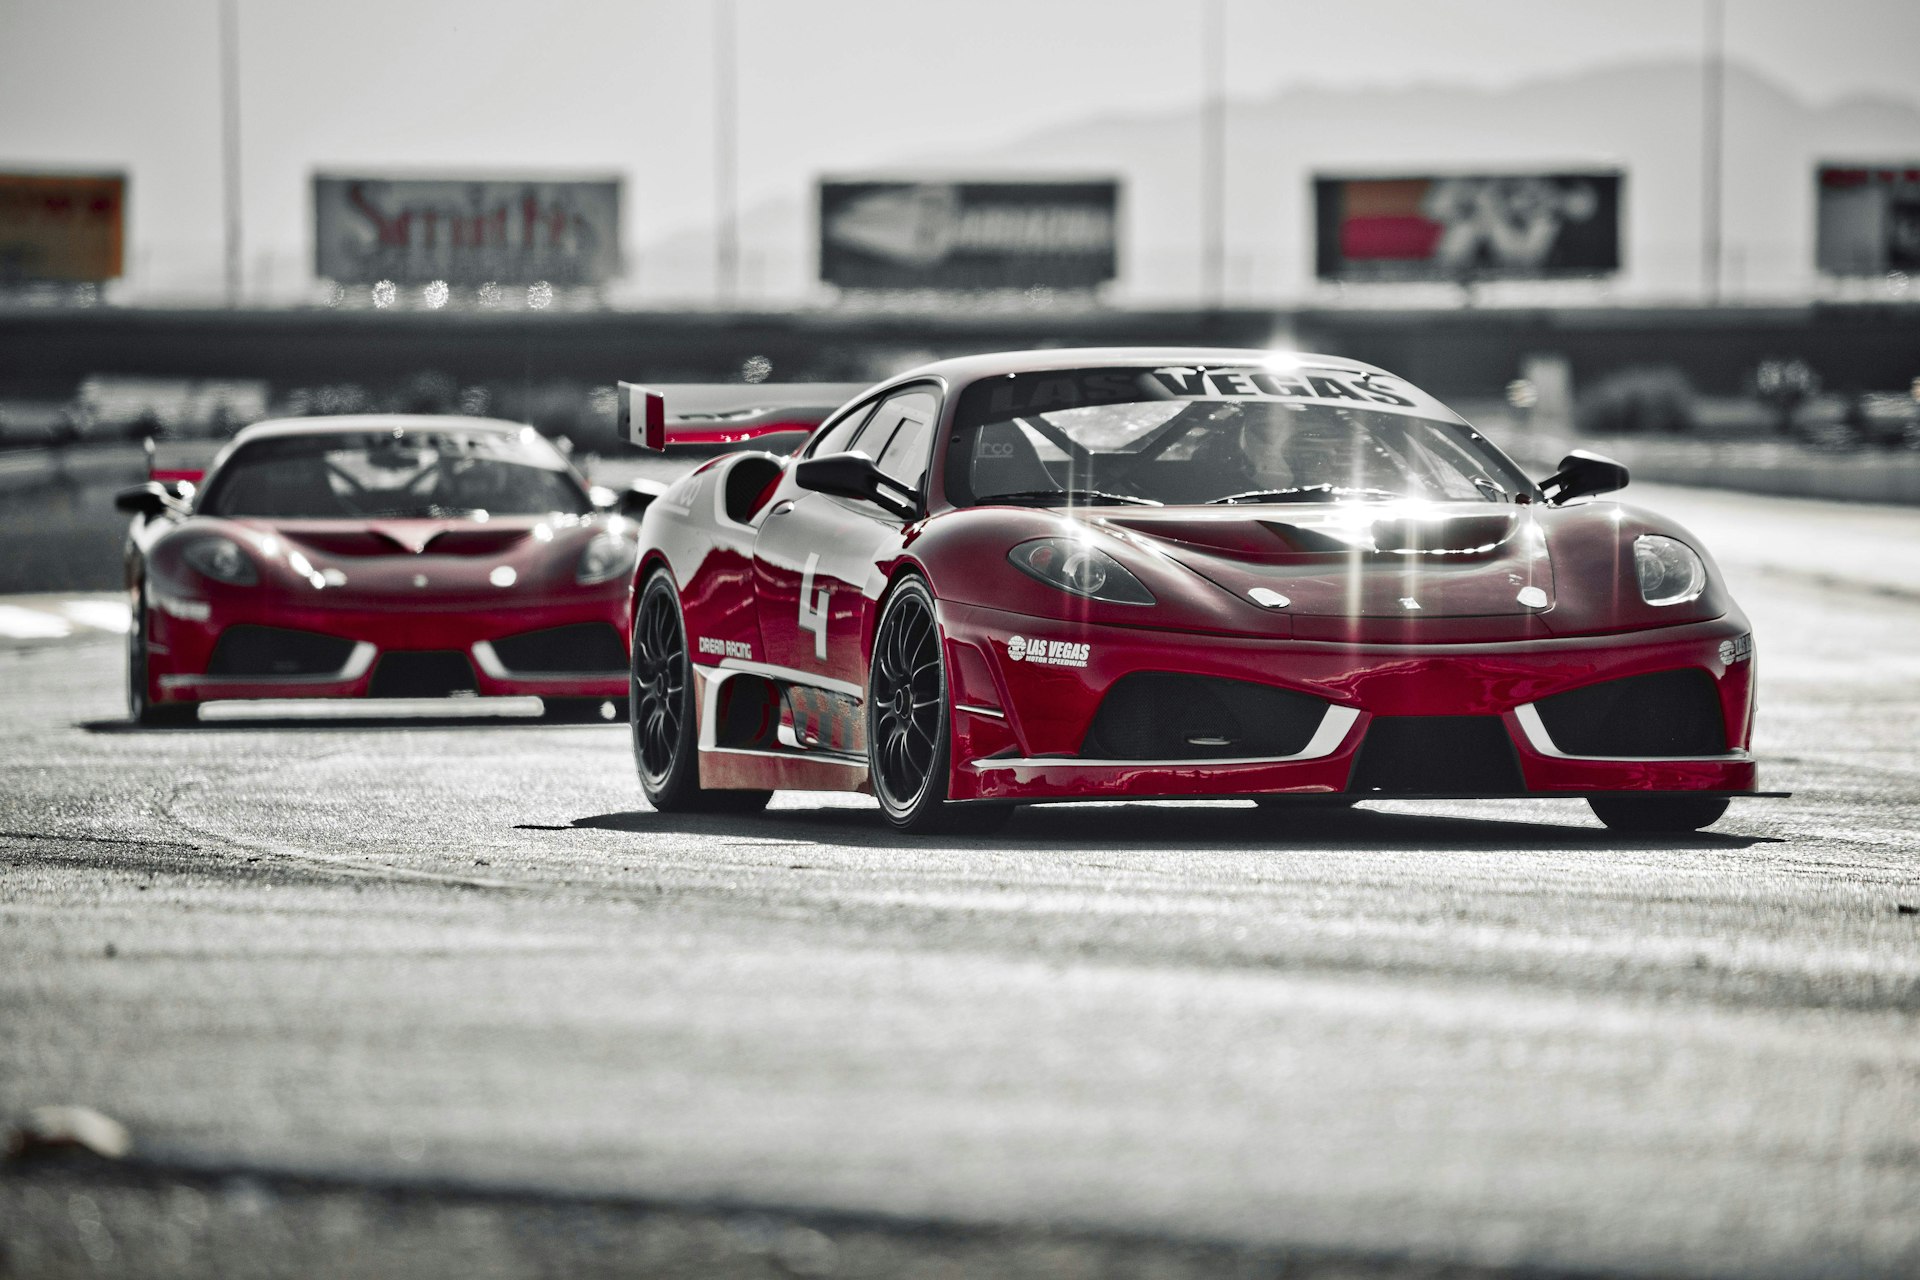 The Ferrari F430 GT heads around the track. Image courtesy of Dream Racing